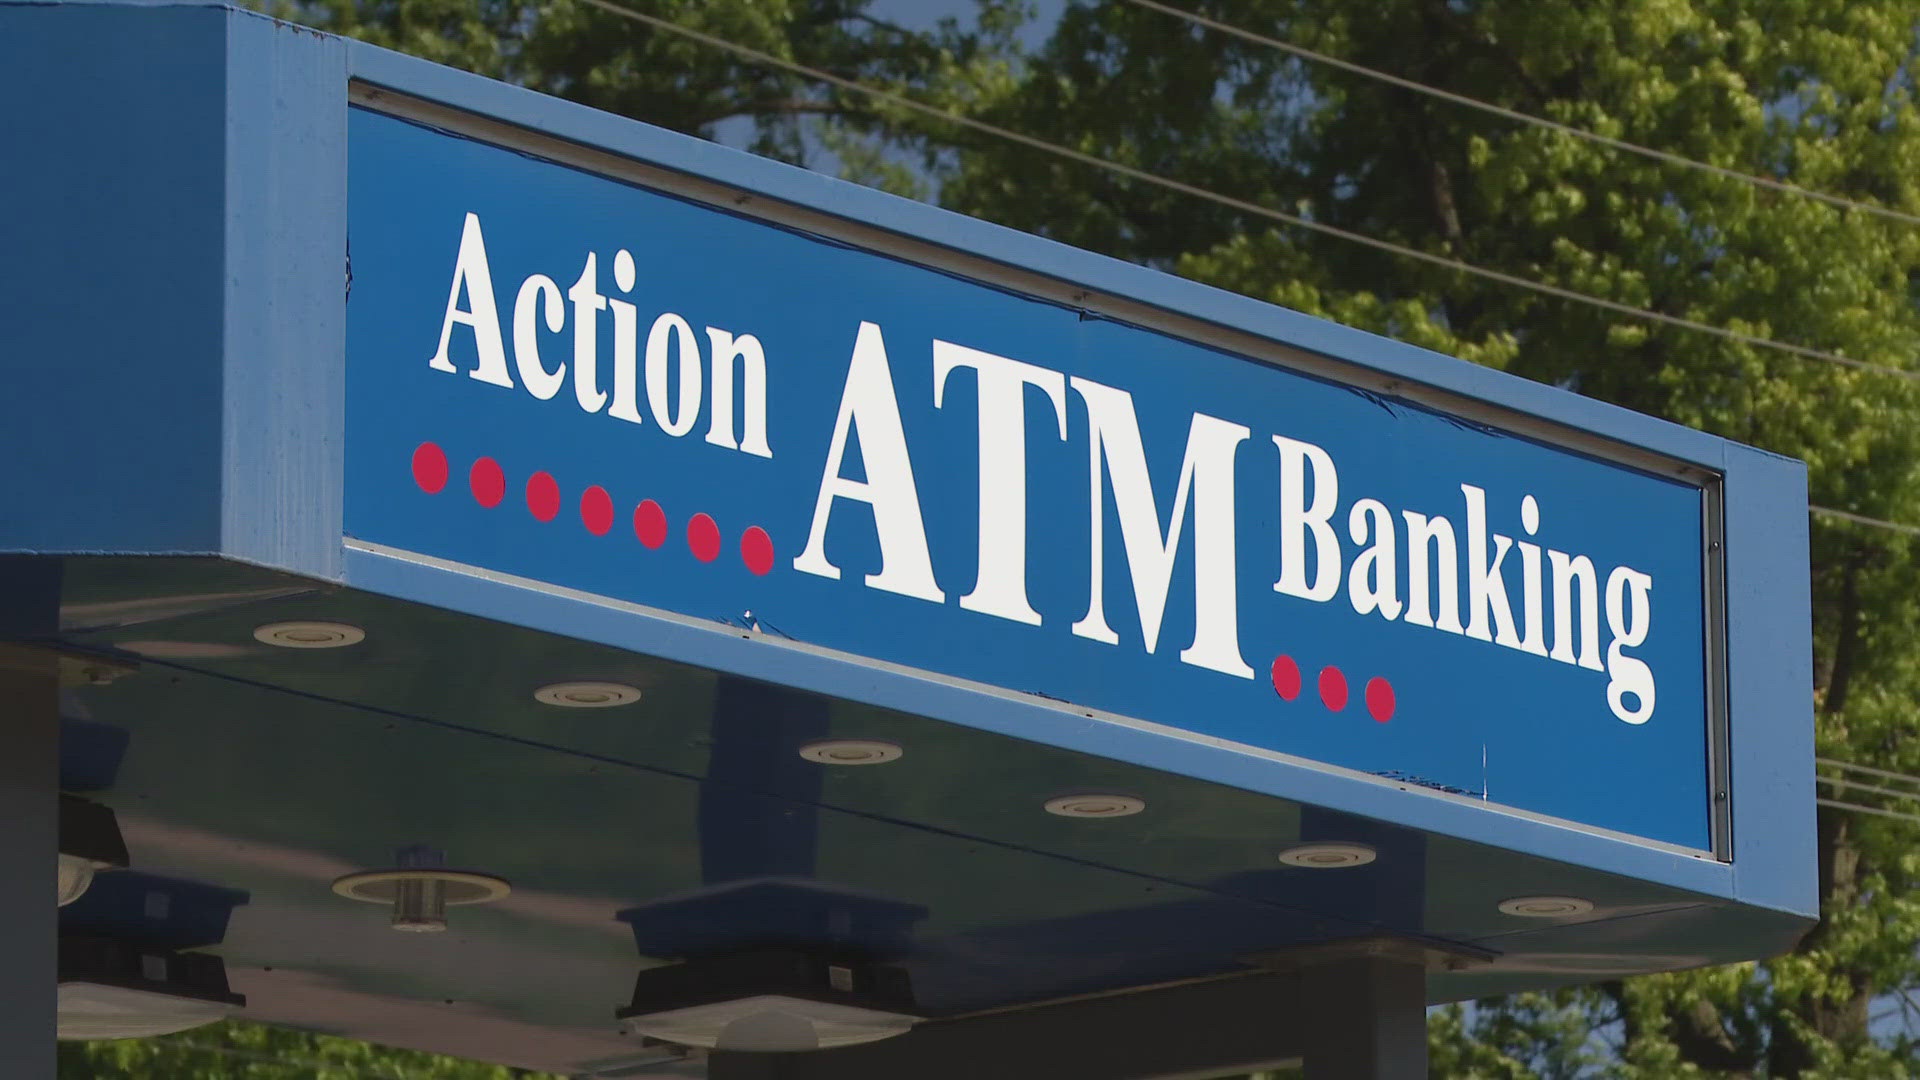 Two Illinois men were charged in connection with ATM thefts in St. Louis County in late 2023. The men are due in court next month.